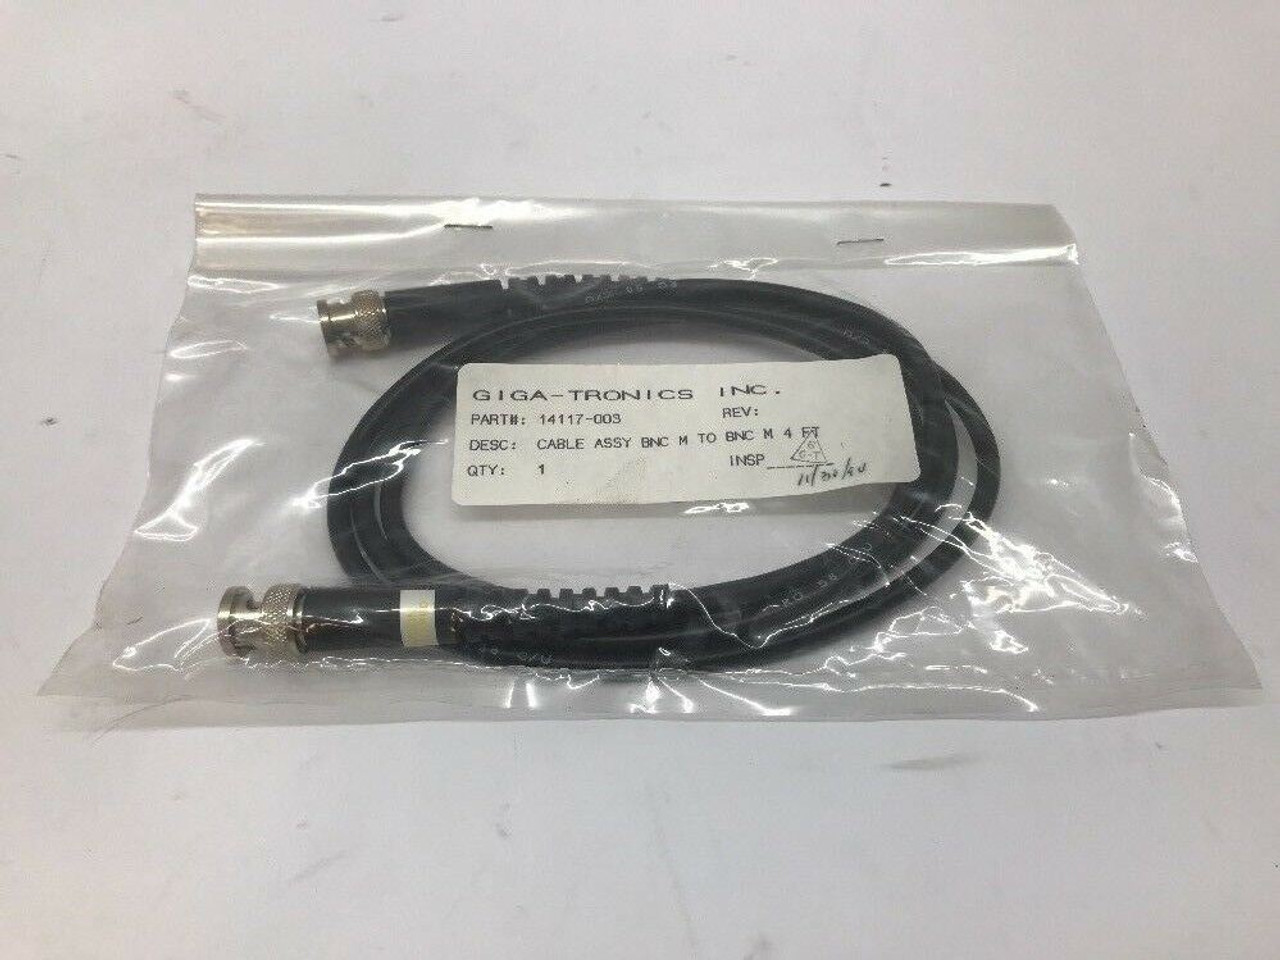 4 ft. Cable Assembly BNC M to BNC M 14117-003 Giga-Tronics